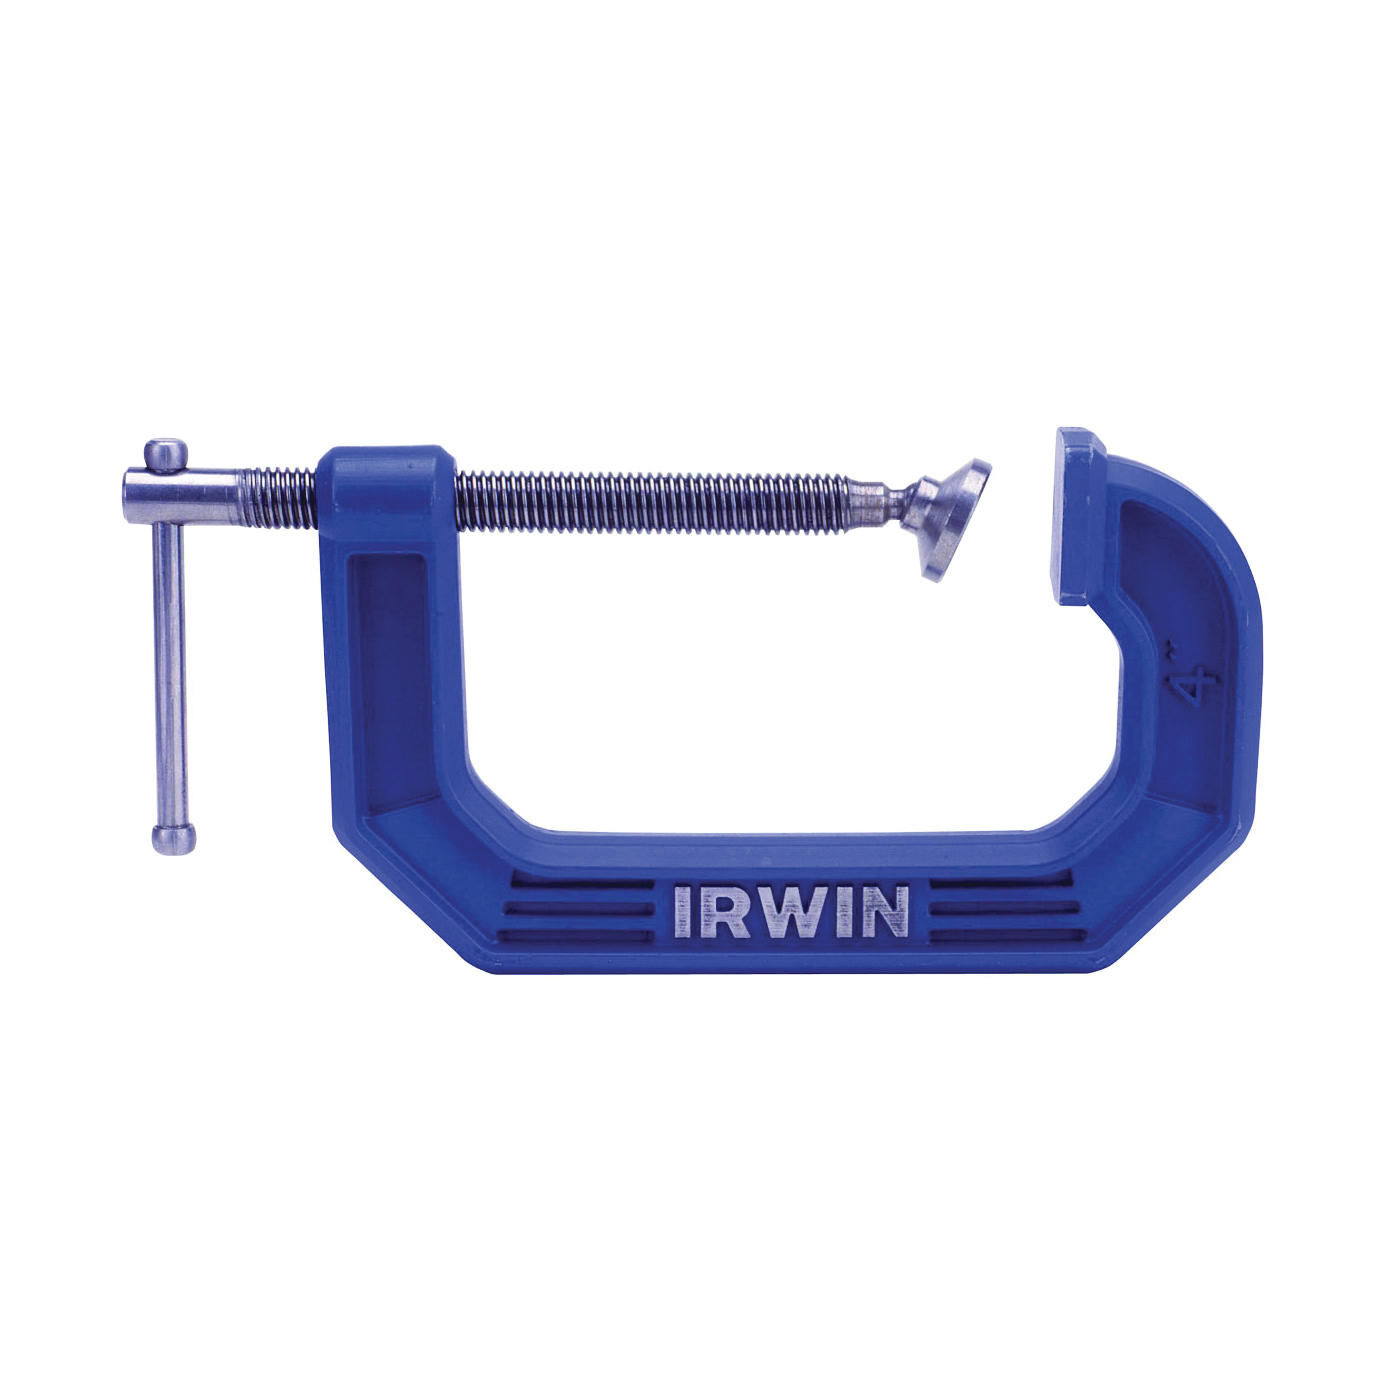 225105 C-Clamp, 10 lb Clamping, 5 in Max Opening Size, 3-1/4 in D Throat, Steel Body, Blue Body